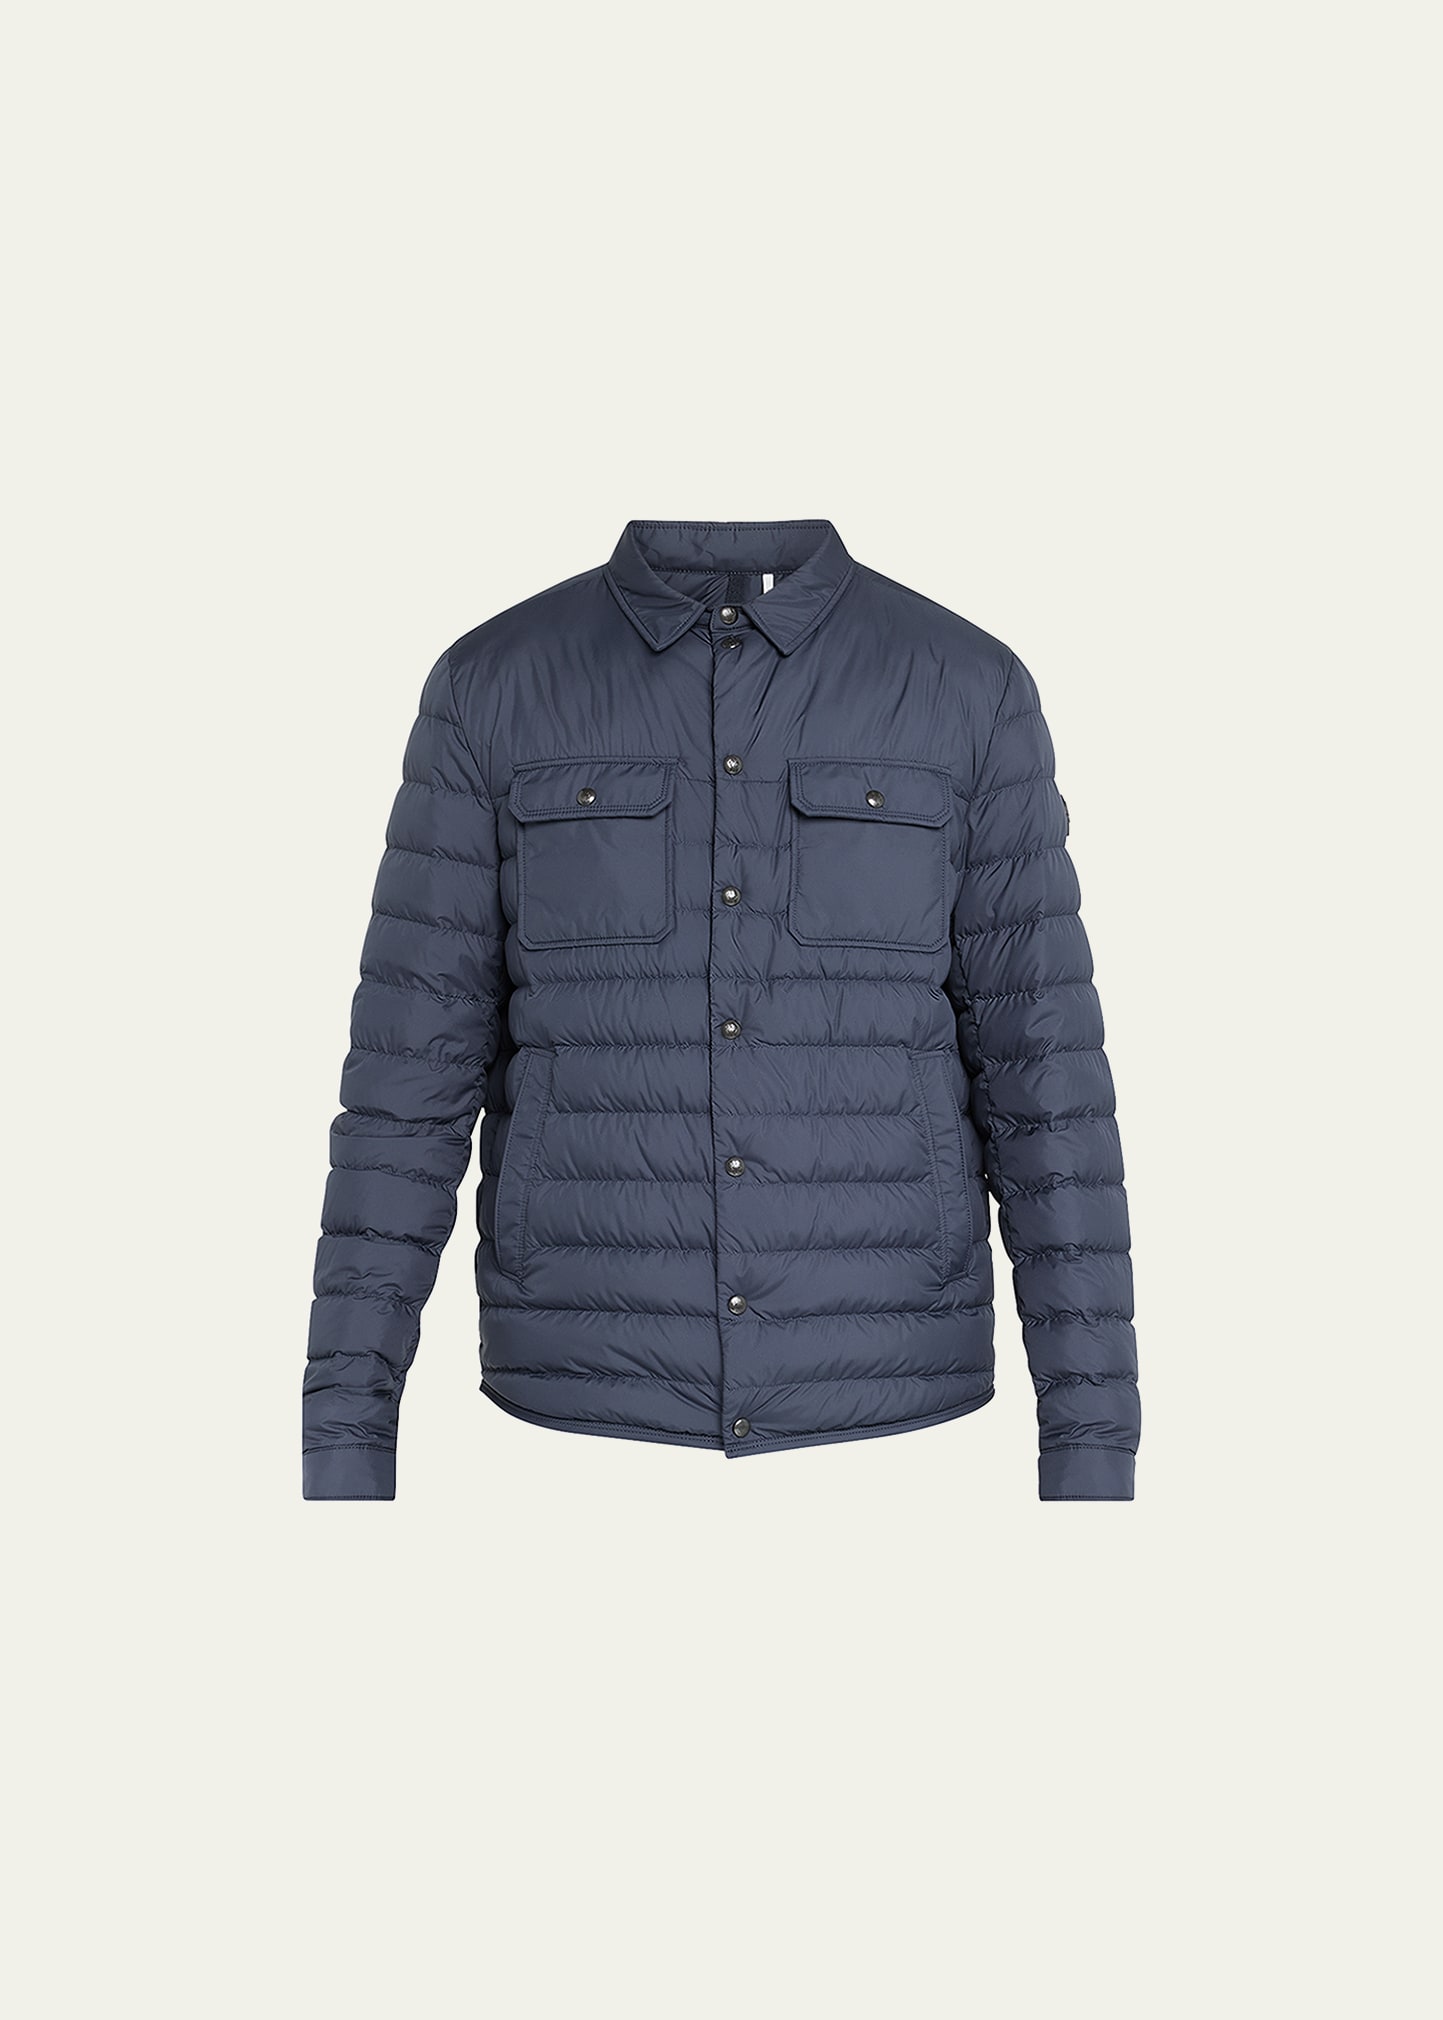 Moncler Men's Sanary Quilted Down Shirt Jacket In Navy